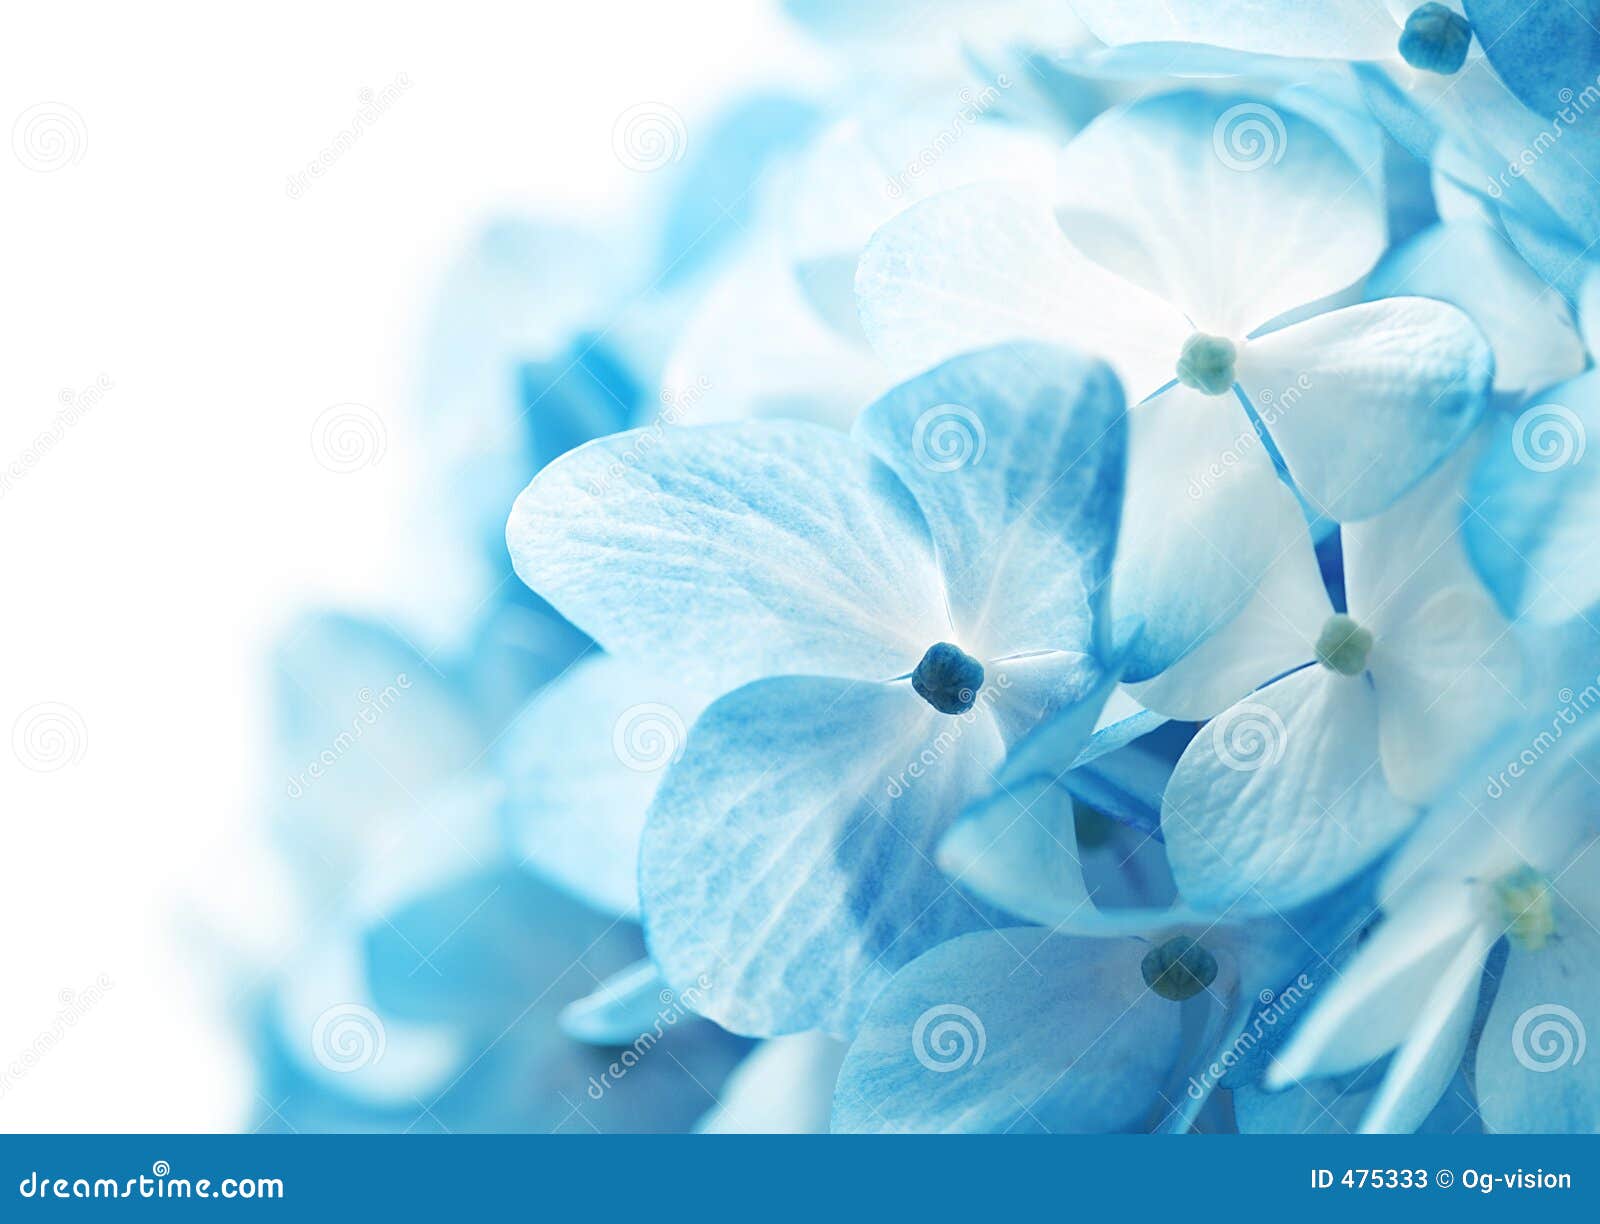 Hydrangea Flowers Background Stock Image - Image of pure, details: 475333